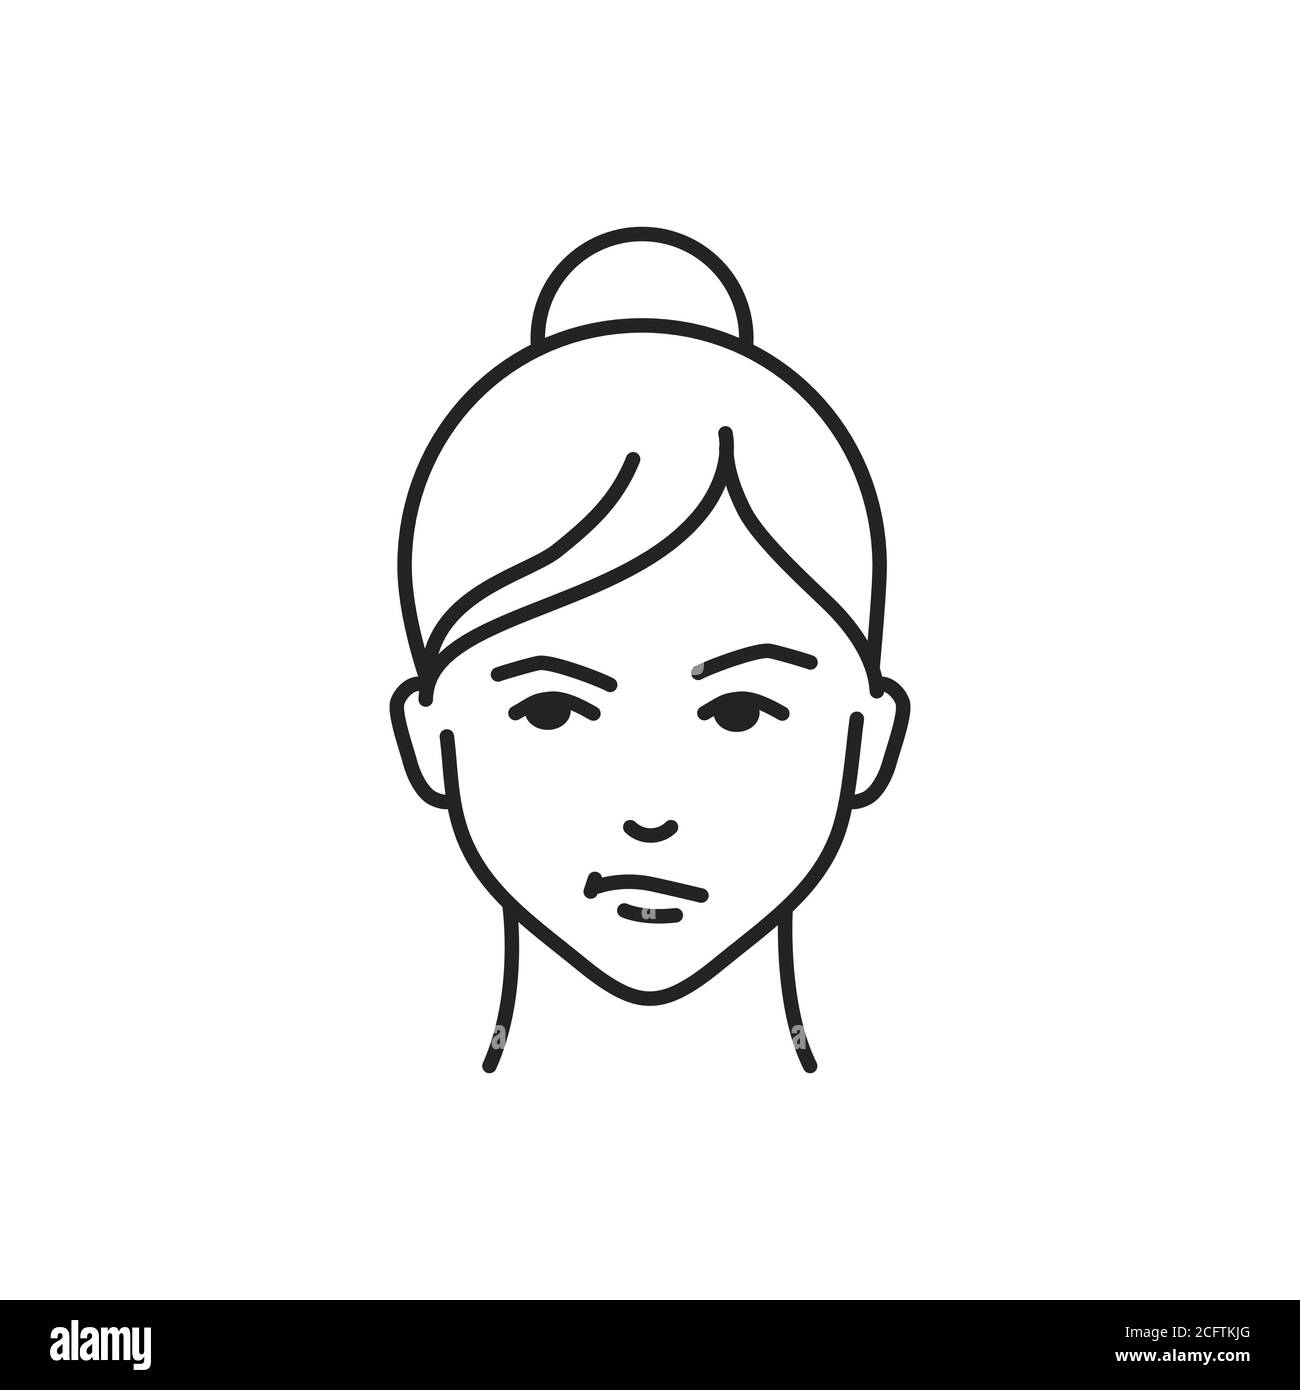 Human feeling suspicion line black icon. Face of a young girl depicting emotion sketch element. Cute character on white background Stock Vector